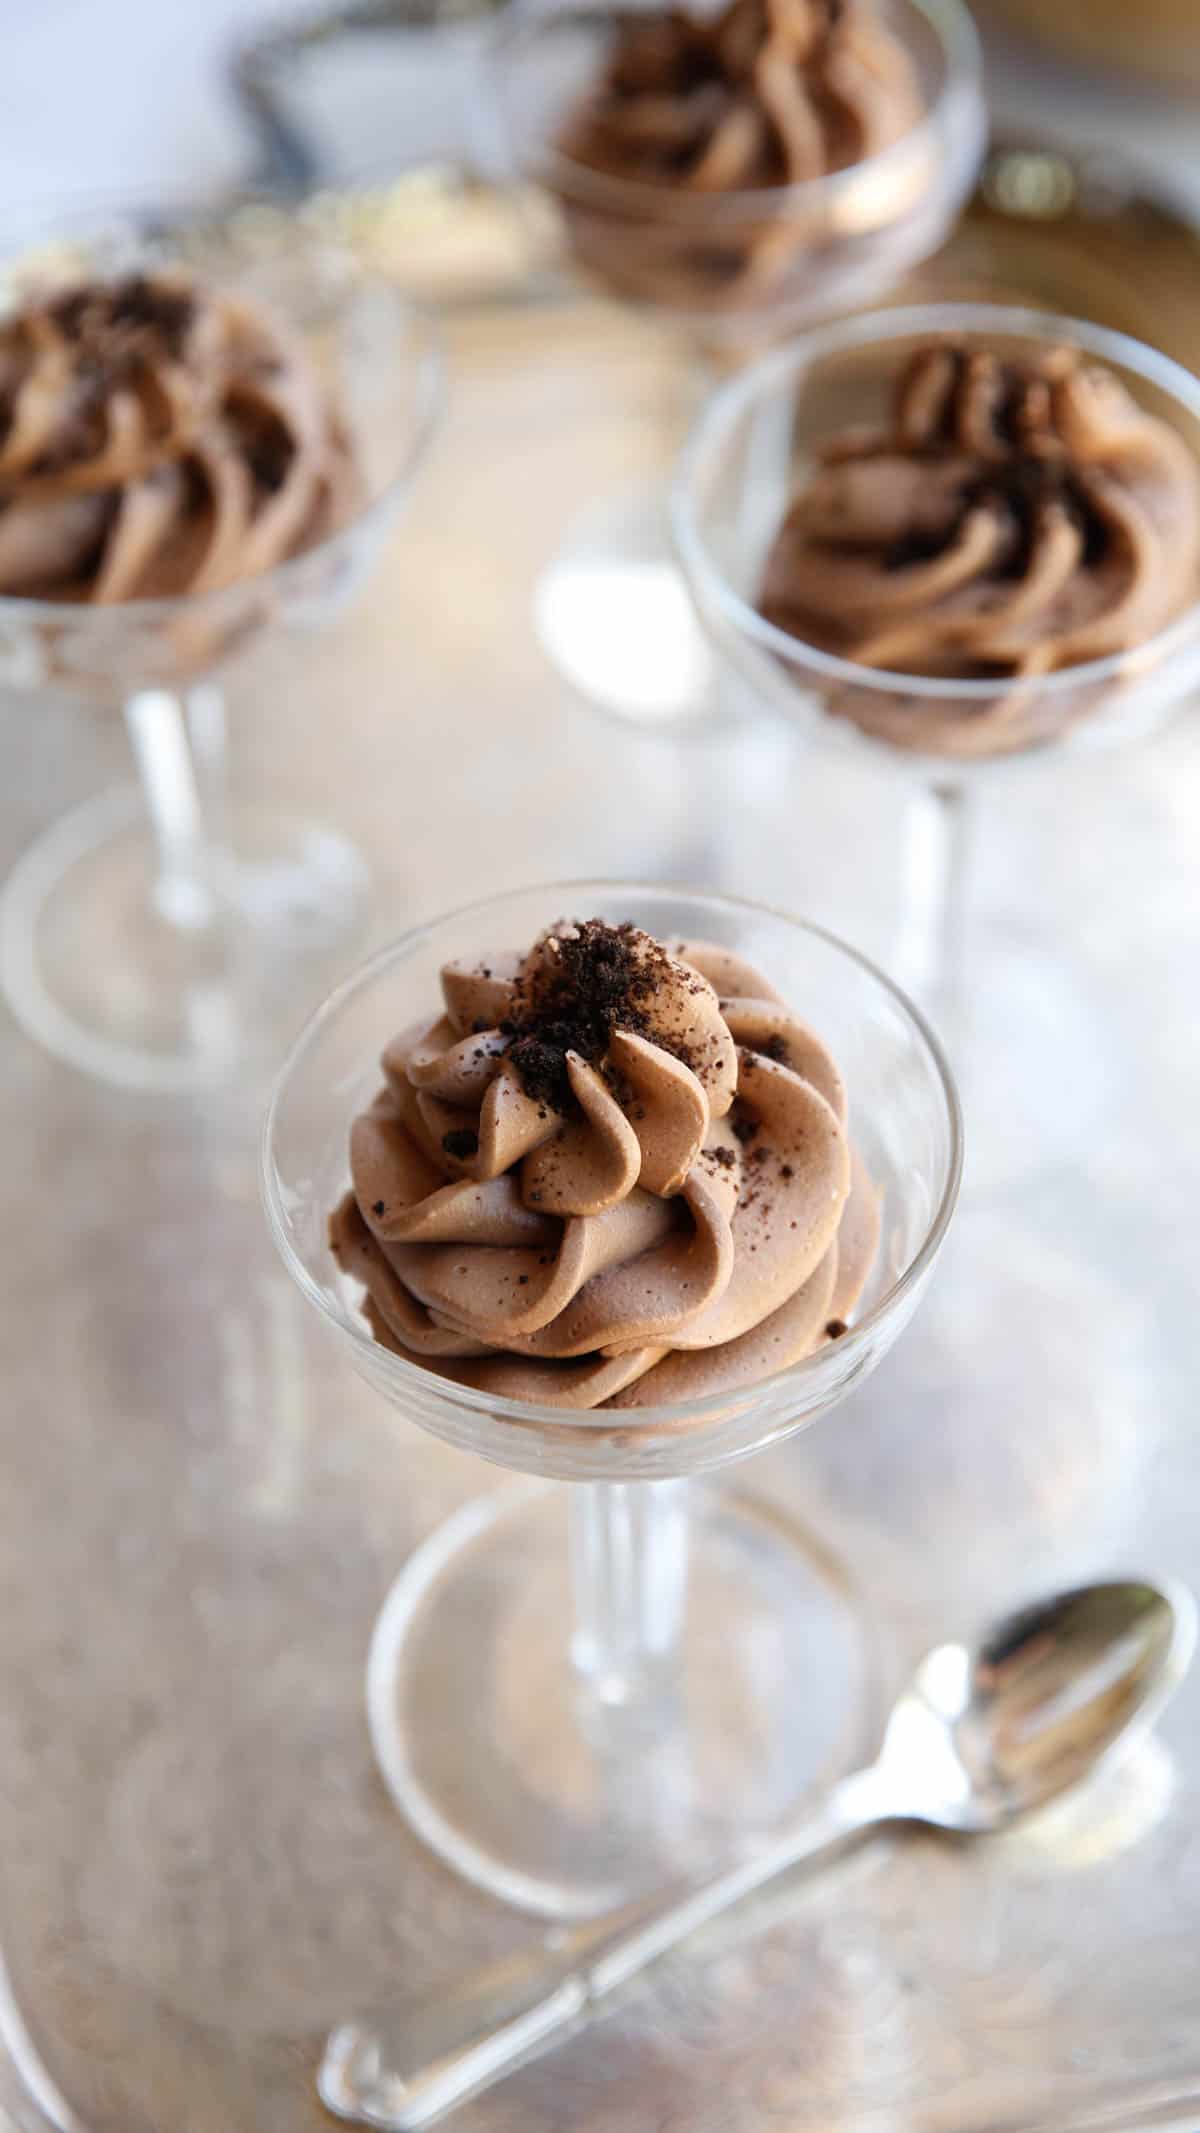 Four Glasses filled with a swirl of egg free chocolate mousse